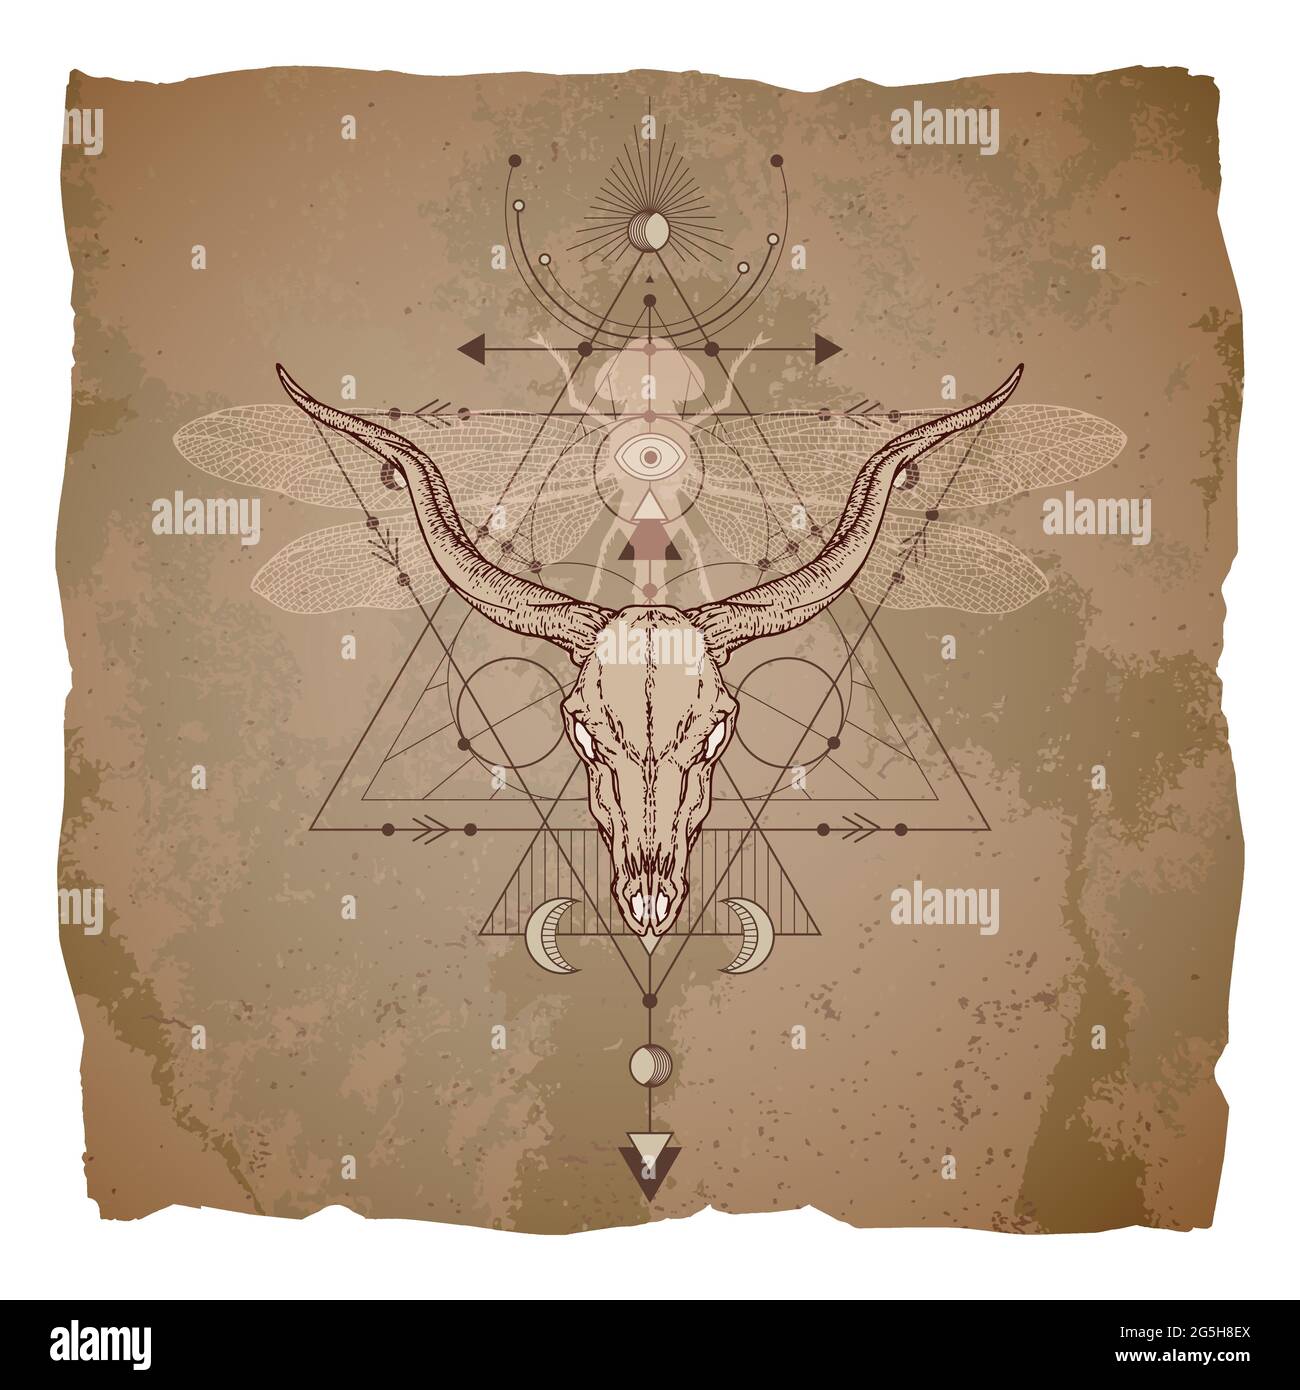 Vector illustration with hand drawn antelope skull, dragonfly and Sacred geometric symbol on vintage paper background with torn edges. Abstract mystic Stock Vector